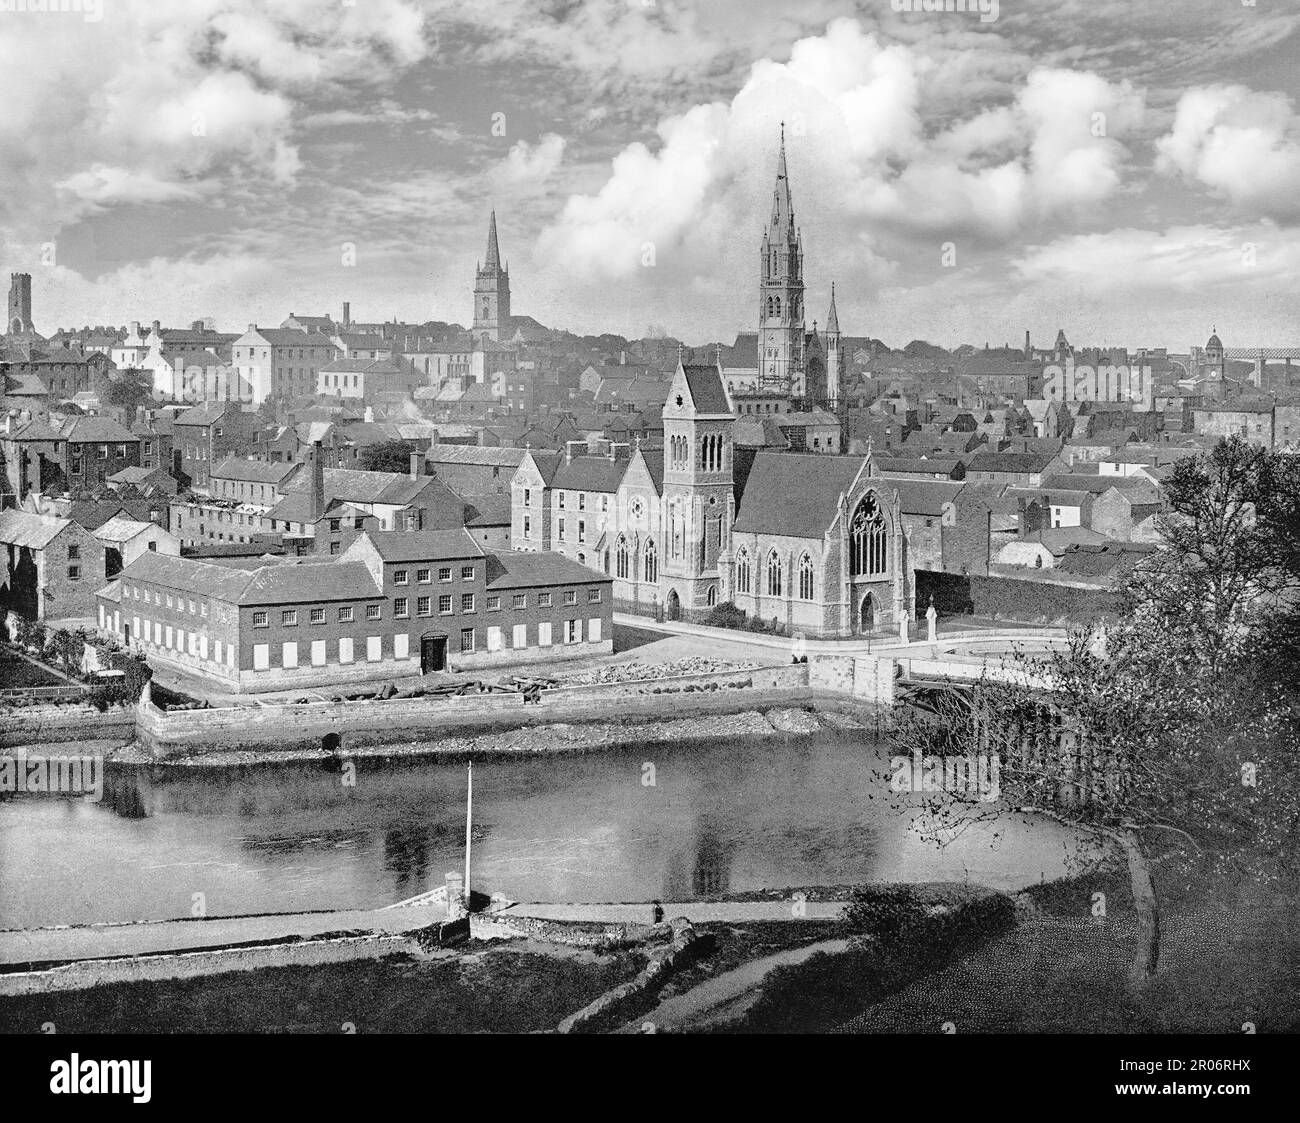 A late 19th century view of the northern bank of the River Boyne as it flows through Drogheda, in County Louth on the east coast of Ireland. The city was besieged by Oliver Cromwell's Parliamentarian forces in September 1649, at the outset of the Cromwellian conquest of Ireland, an event that resulted in a massacre. Stock Photo